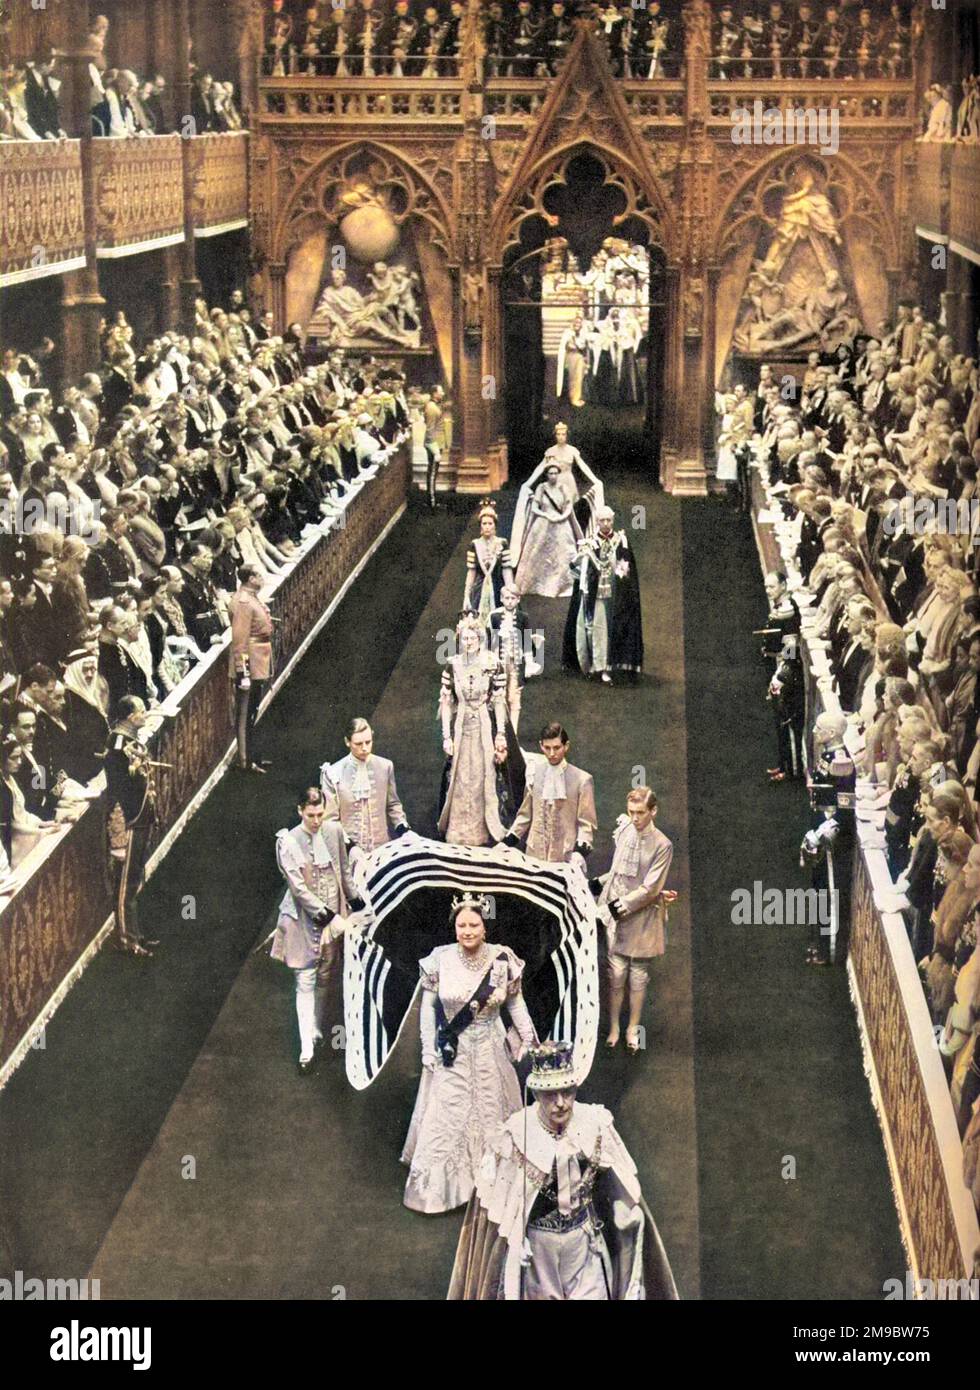 Queen Elizabeth, the Queen Mother passes along the nave of Westminster Abbey en route from the Annexe for the Coronation of her daughter, Queen Elizabeth II in June 1953.  She is followed by Princess Margaret and her retinue. Stock Photo